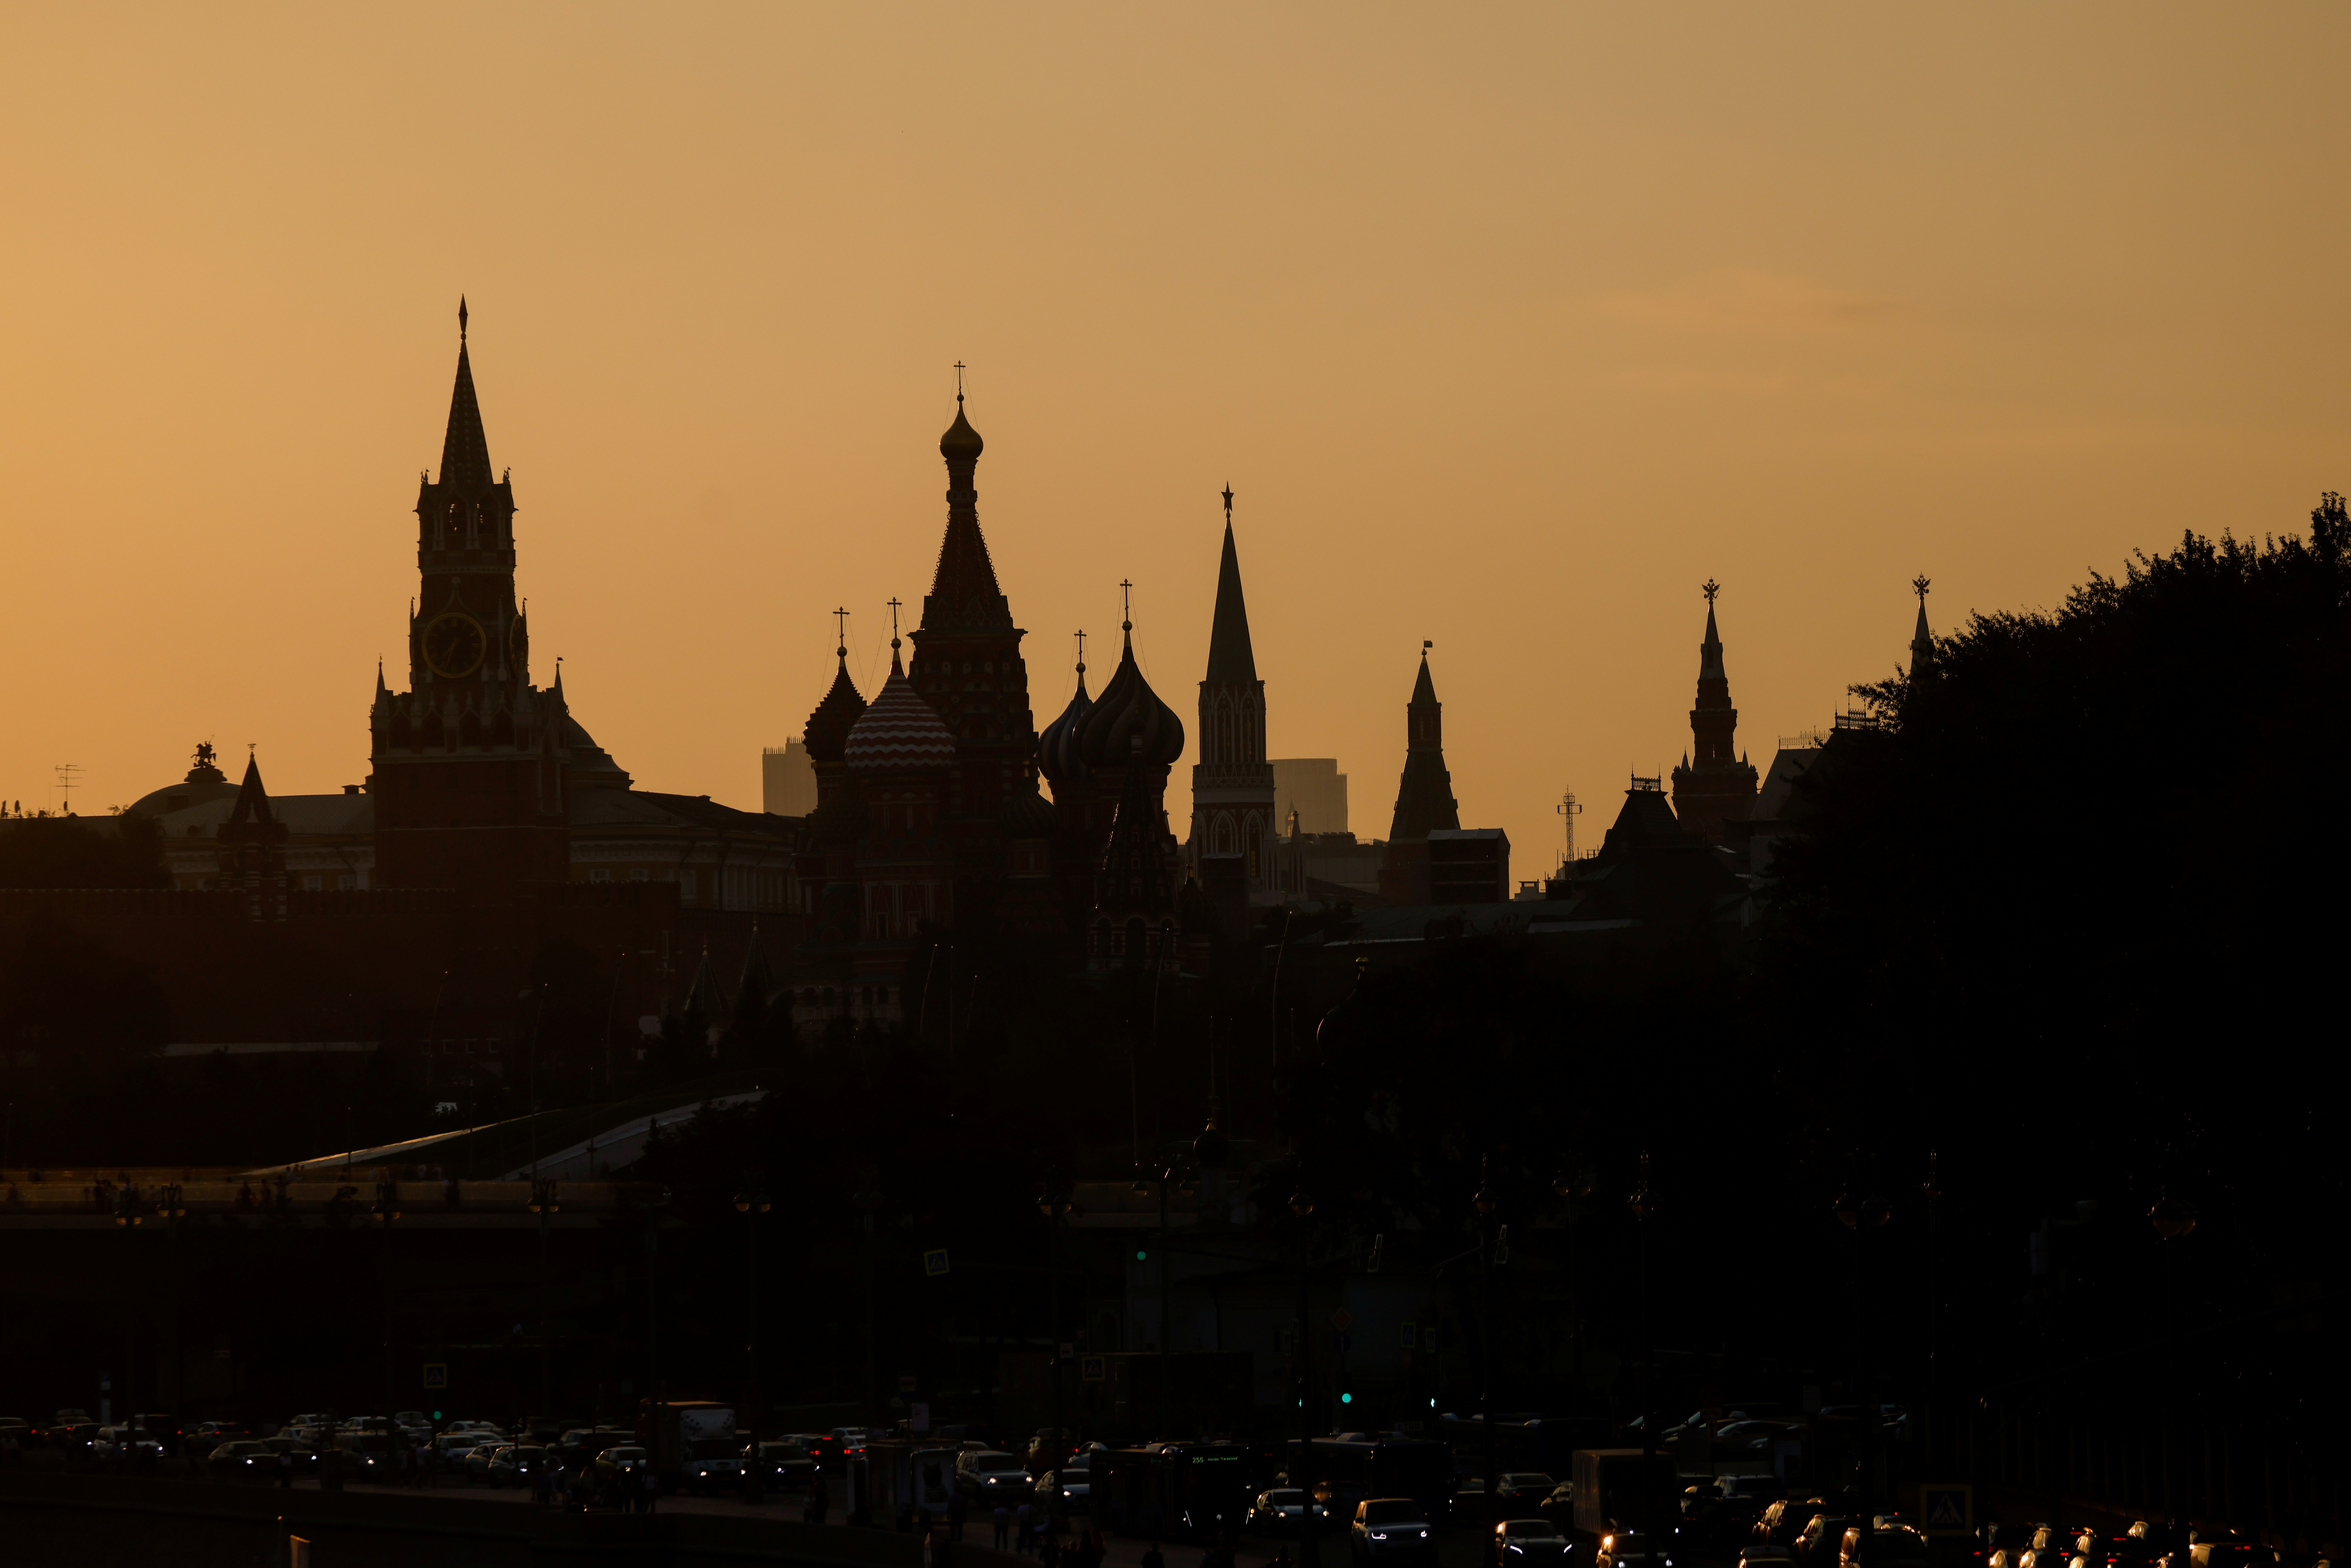 St. Basil's Cathedral and towers of Kremlin are silhouetted against the sunset in Moscow